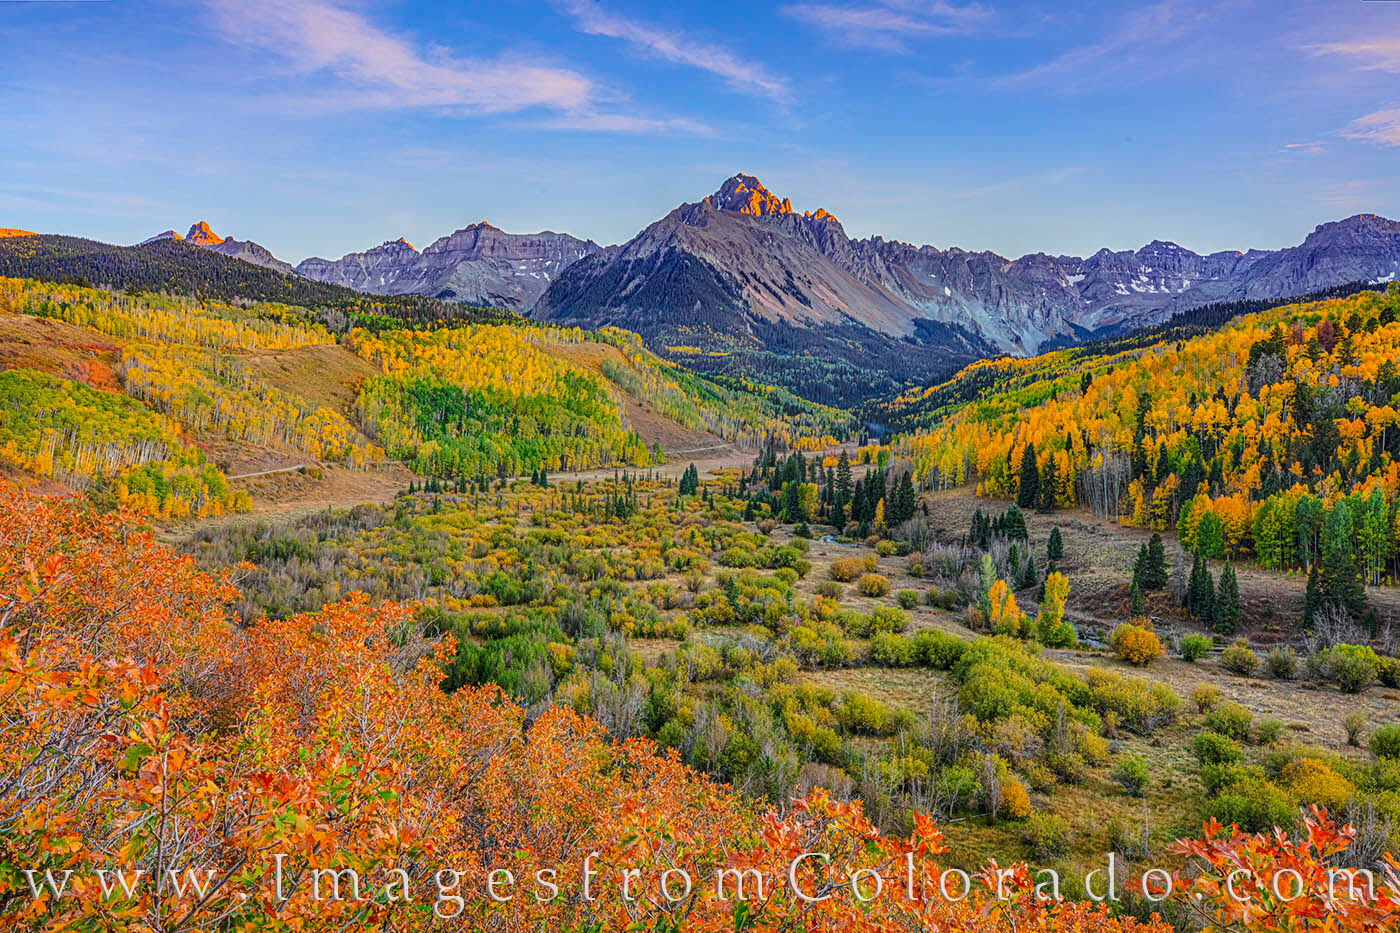 Mount Sneffels rises over 14,000’ into the cool October evening and towers above a valley filled with red and orange scrub...